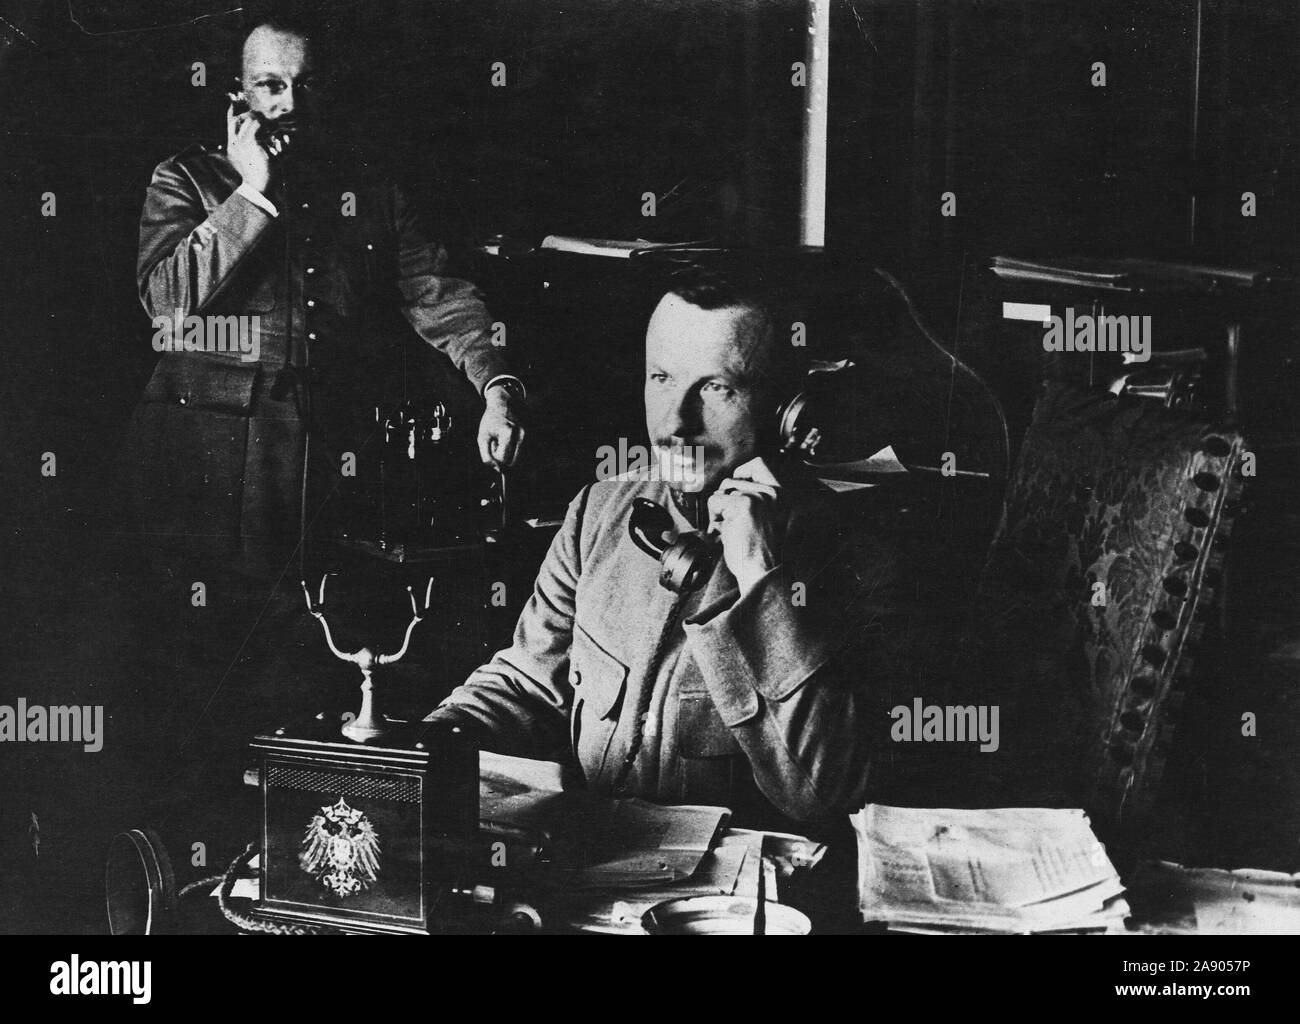 1918 - Armistice - Officers of the Allied Commission at Spa use former Kaiser's phone. French Officer of the Allied Armistice Commission talking through the telephone which the former Kaiser had used Stock Photo